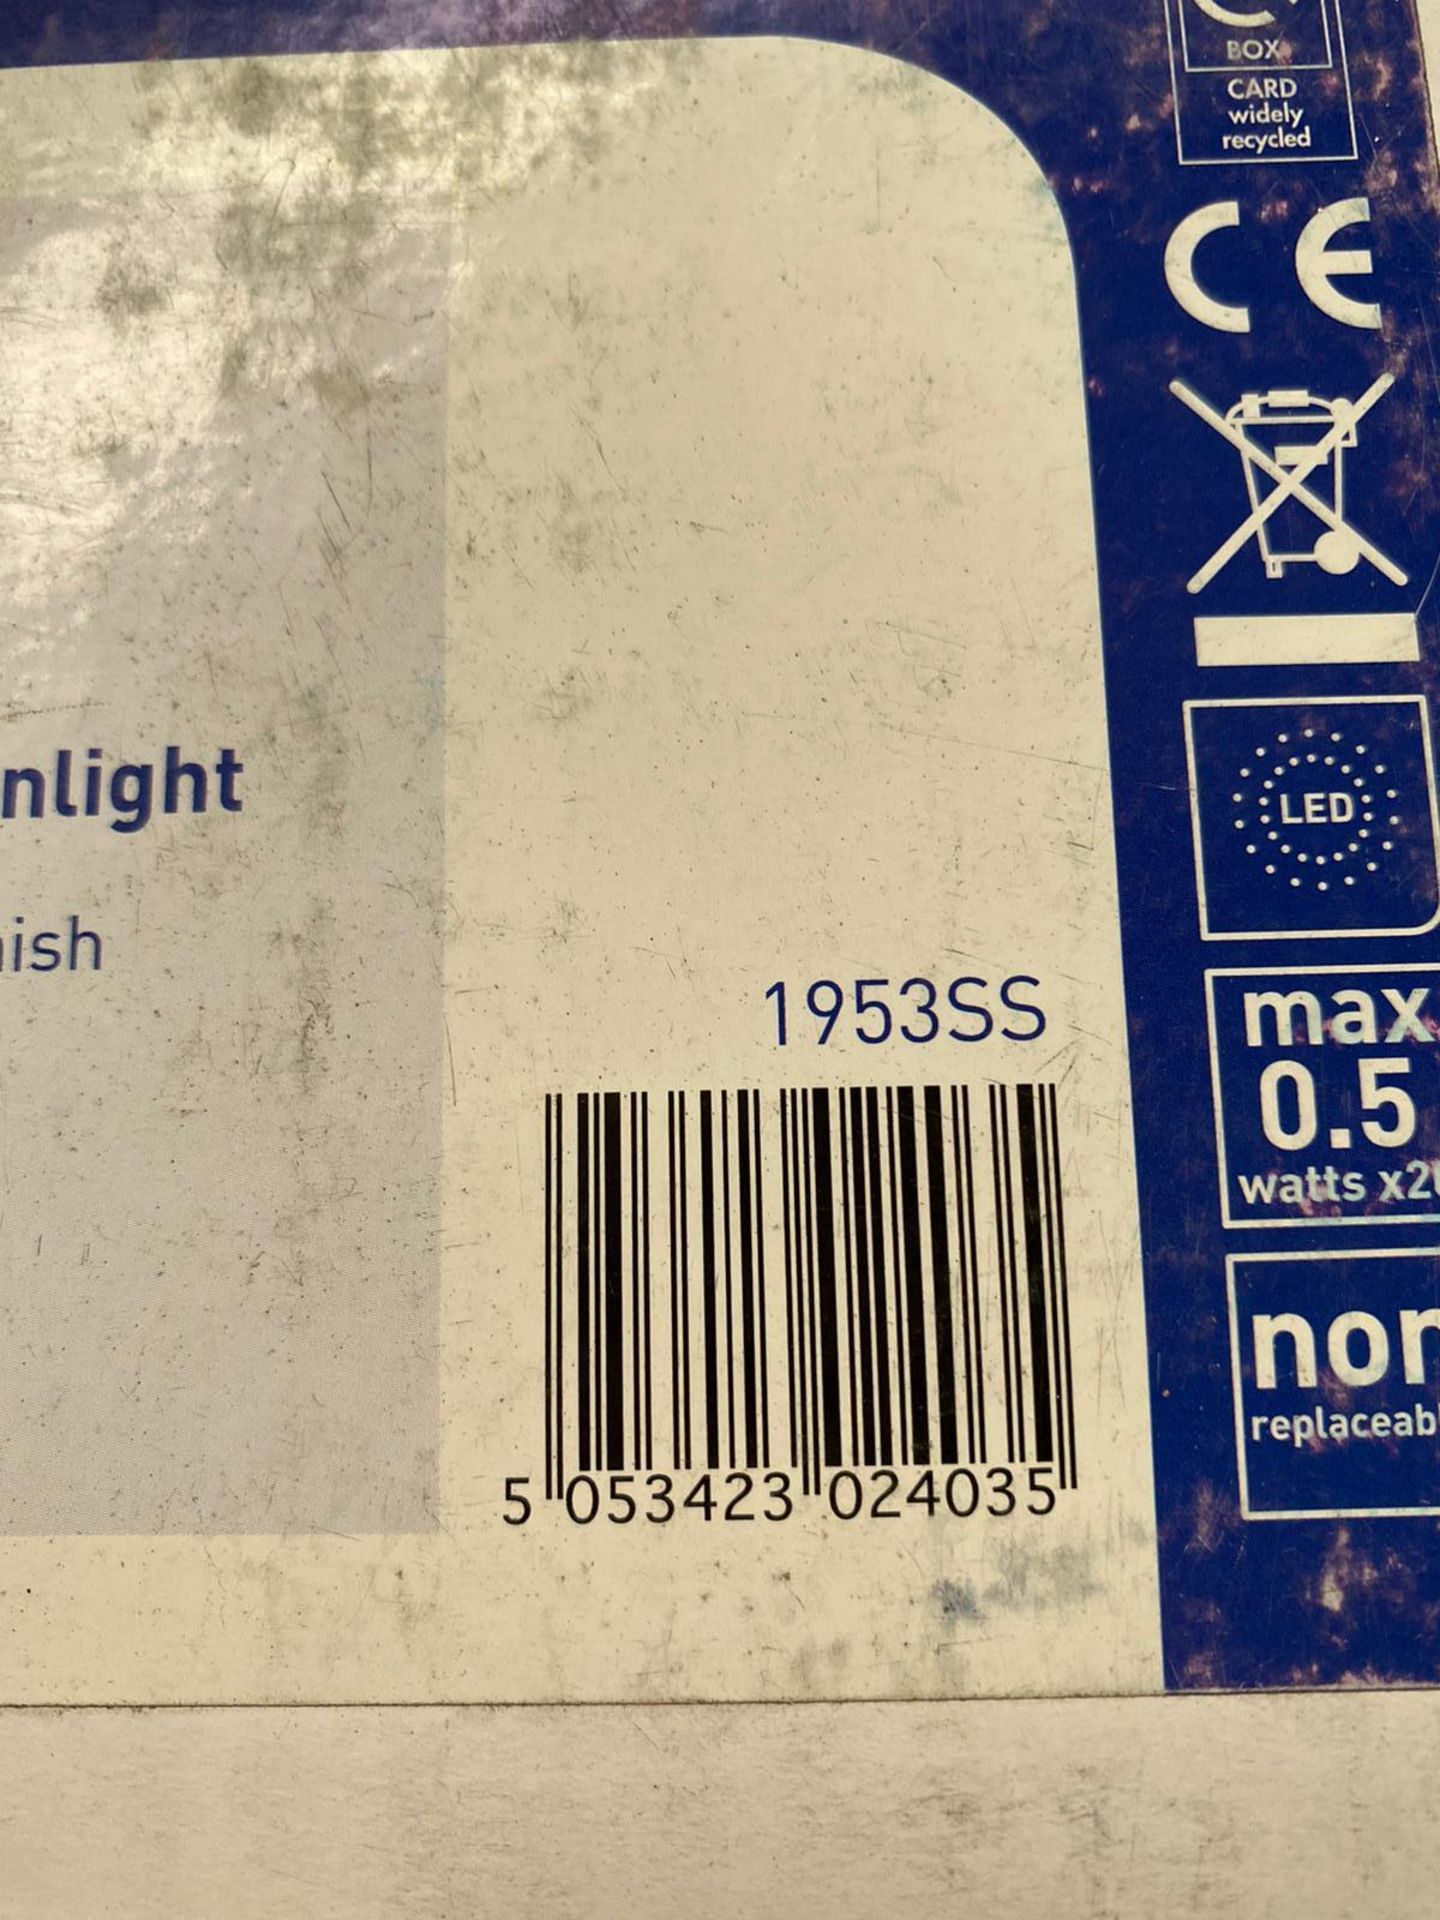 1 x Searchlight Wall Up/downlight in a satin silver - Ref: 1953SS - New Boxed - RRP: £105.00(each) - Image 2 of 4